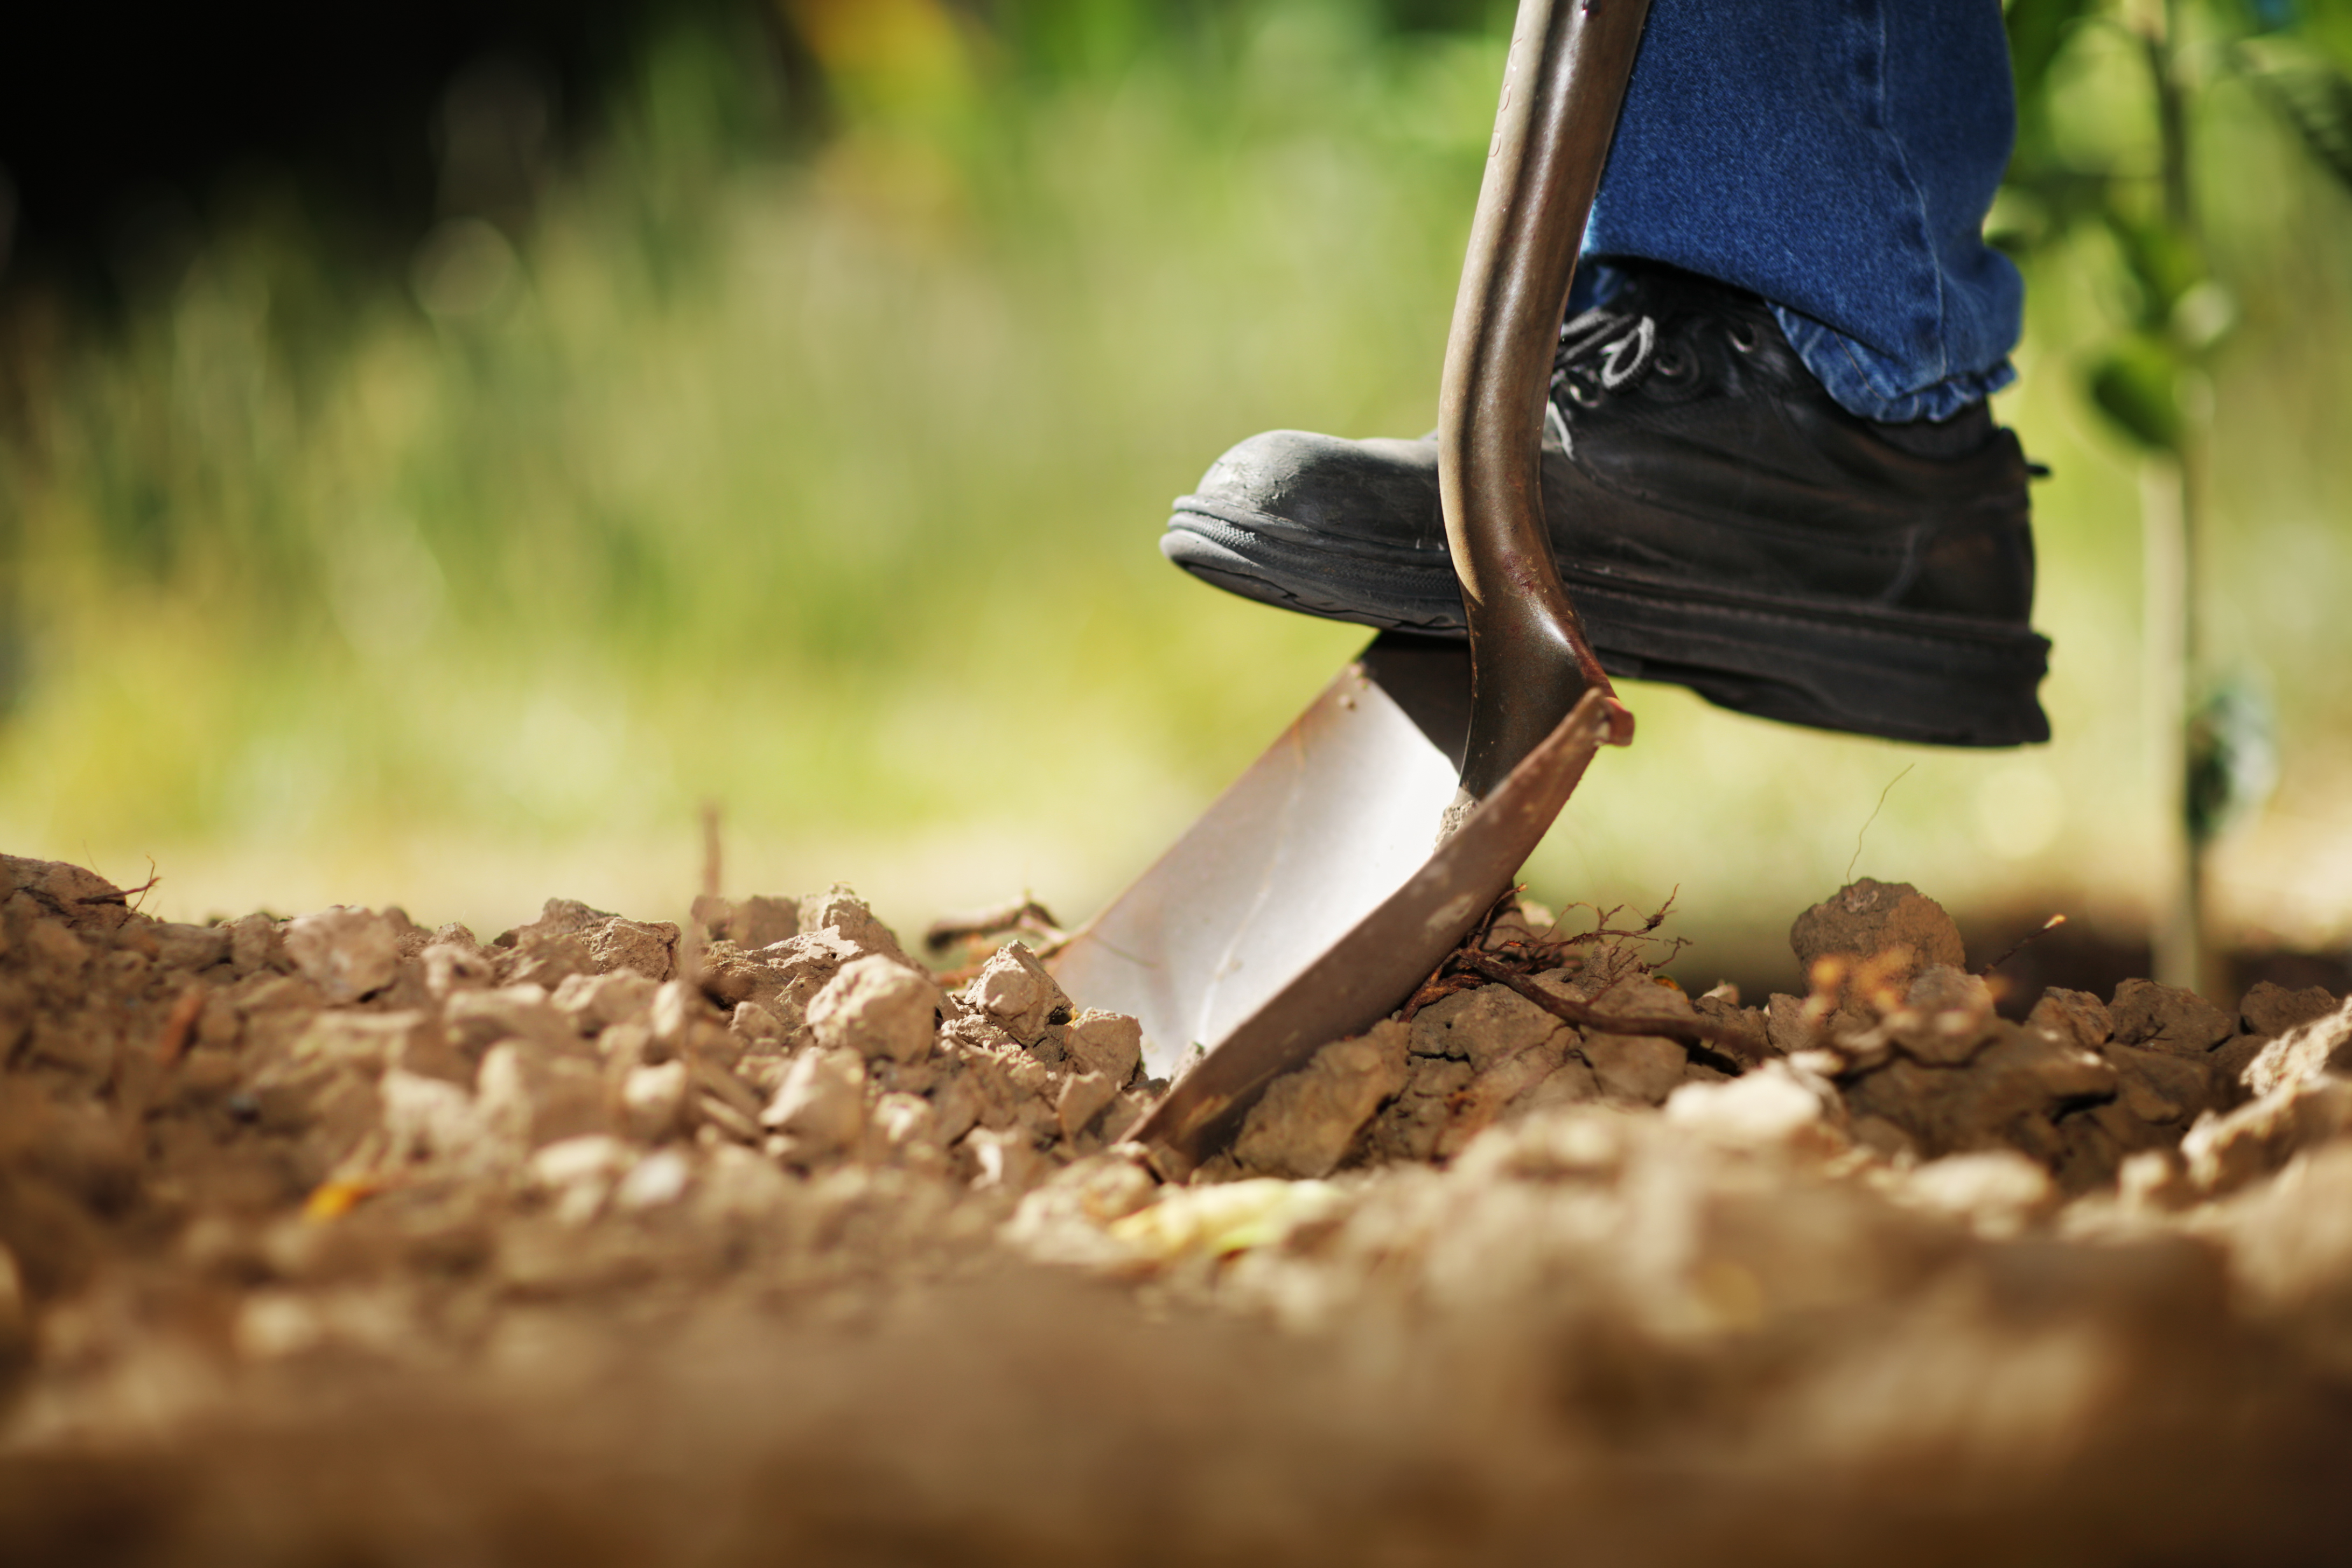 Person digging soil with a shovel | Source: Shutterstock